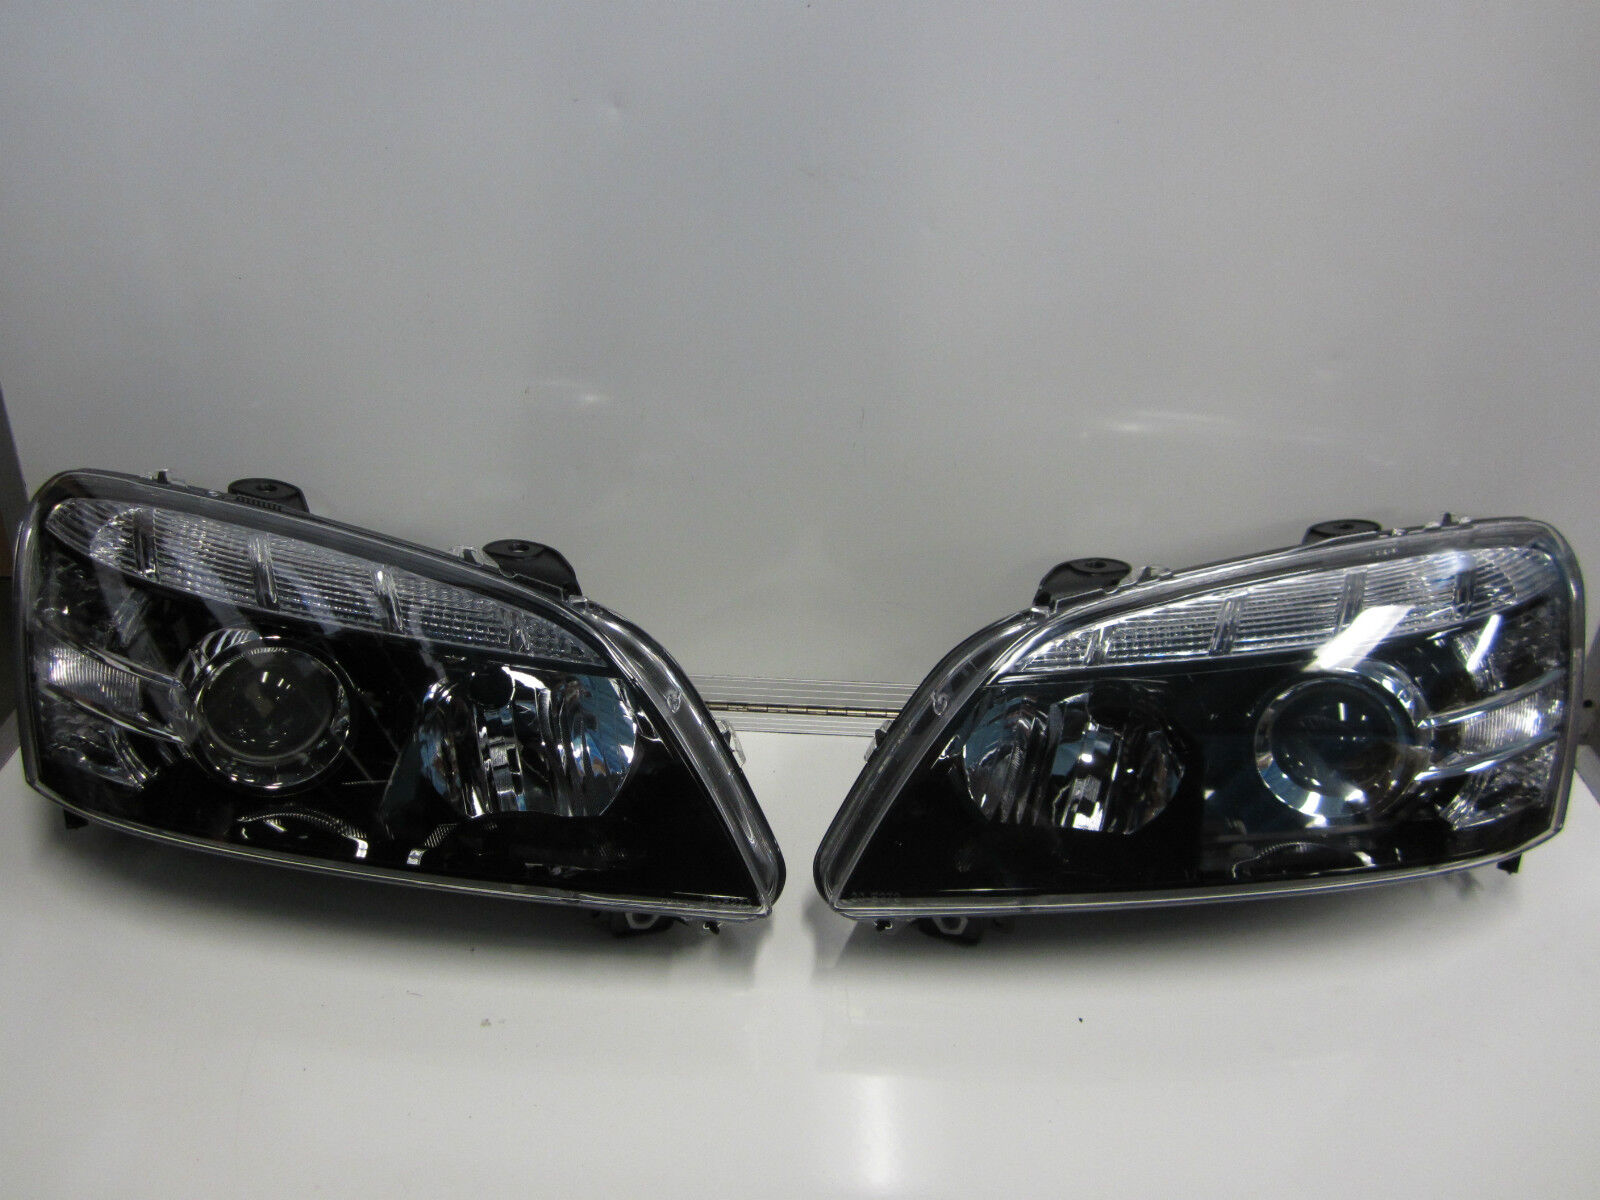 HOLDEN COMMODORE WM STATESMAN CAPRICE HEADLIGHT PAIR NEW LEFT AND RIGHT SIDE